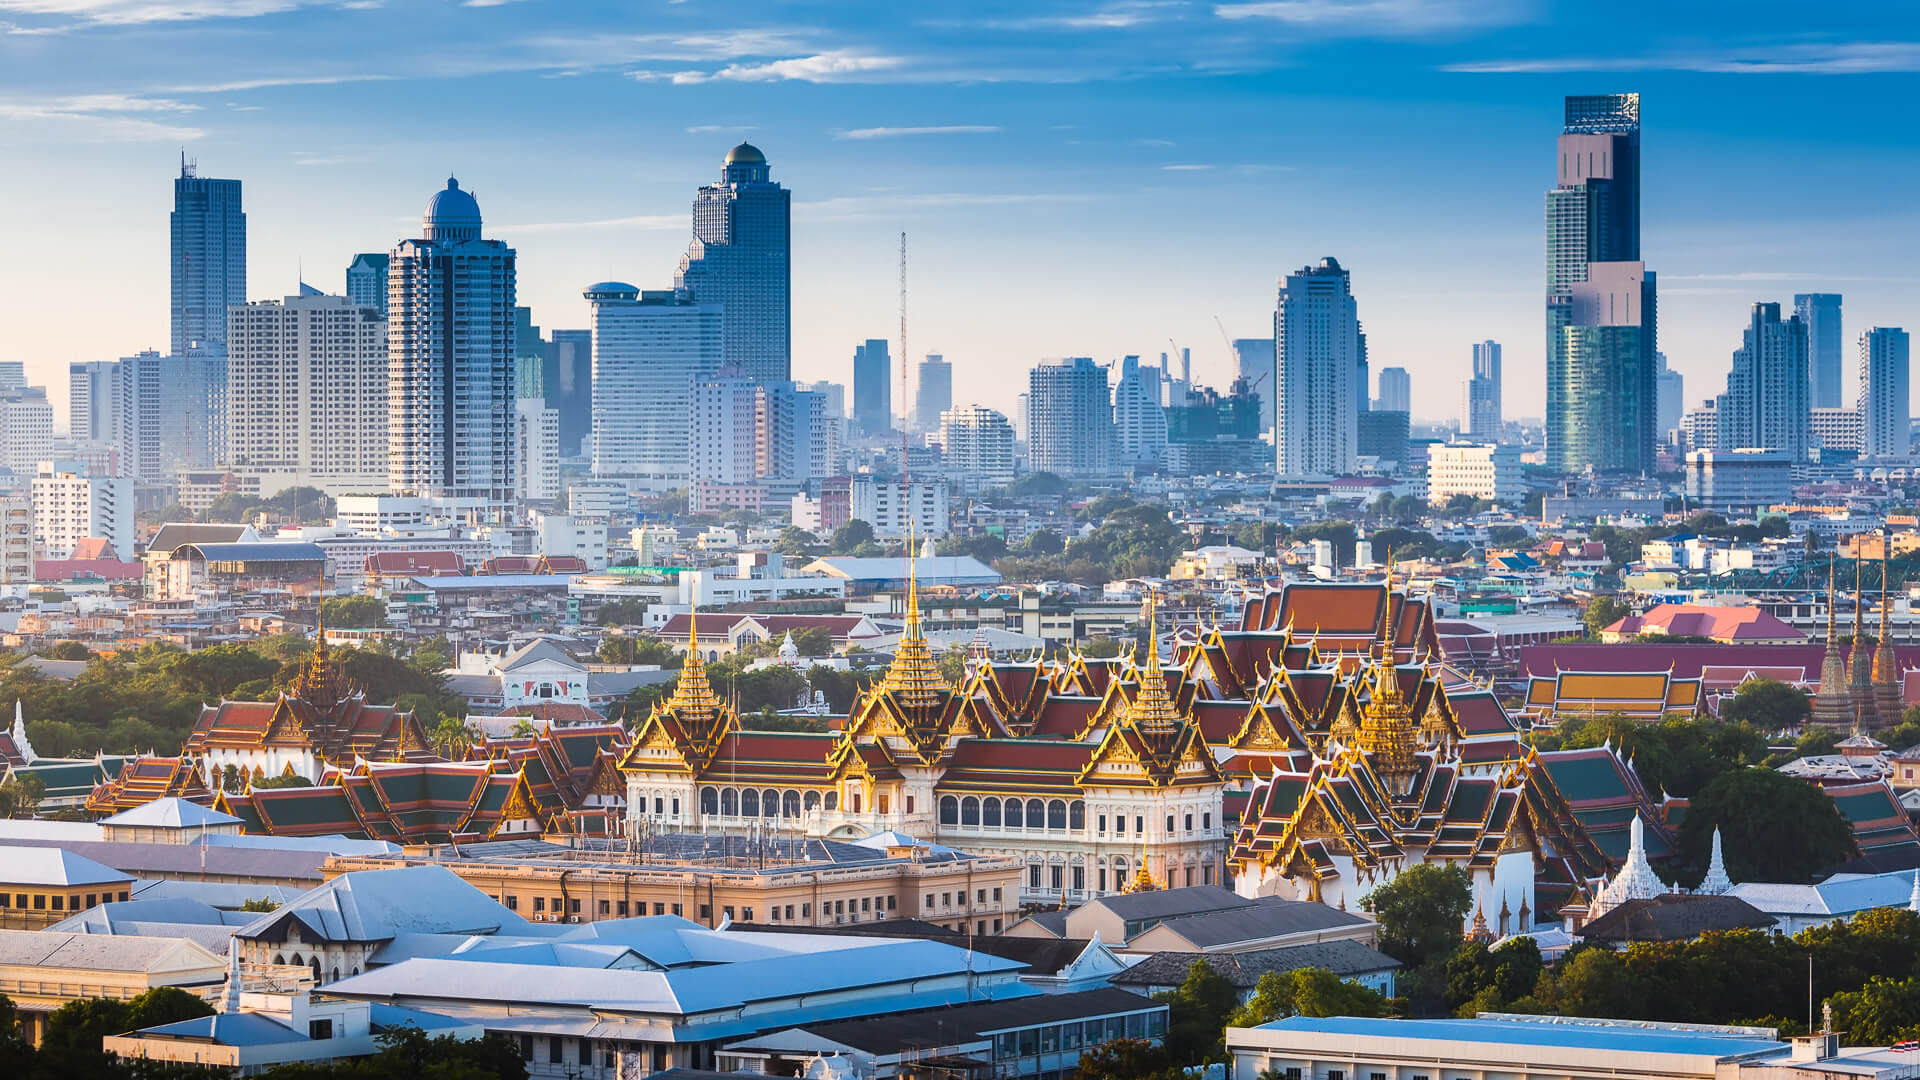 <p><strong>Average monthly cost</strong>: $2,000</p> <p>Thailand has been a popular expat country for decades and continues to offer a lost-cost lifestyle with access to modern amenities. There are many expat-populated communities in Thailand, and retirees can live well on just $2,000 per month. Further away from the big cities, costs can be down to around $1,000 per month, including rent costs, which is incredibly affordable.</p>